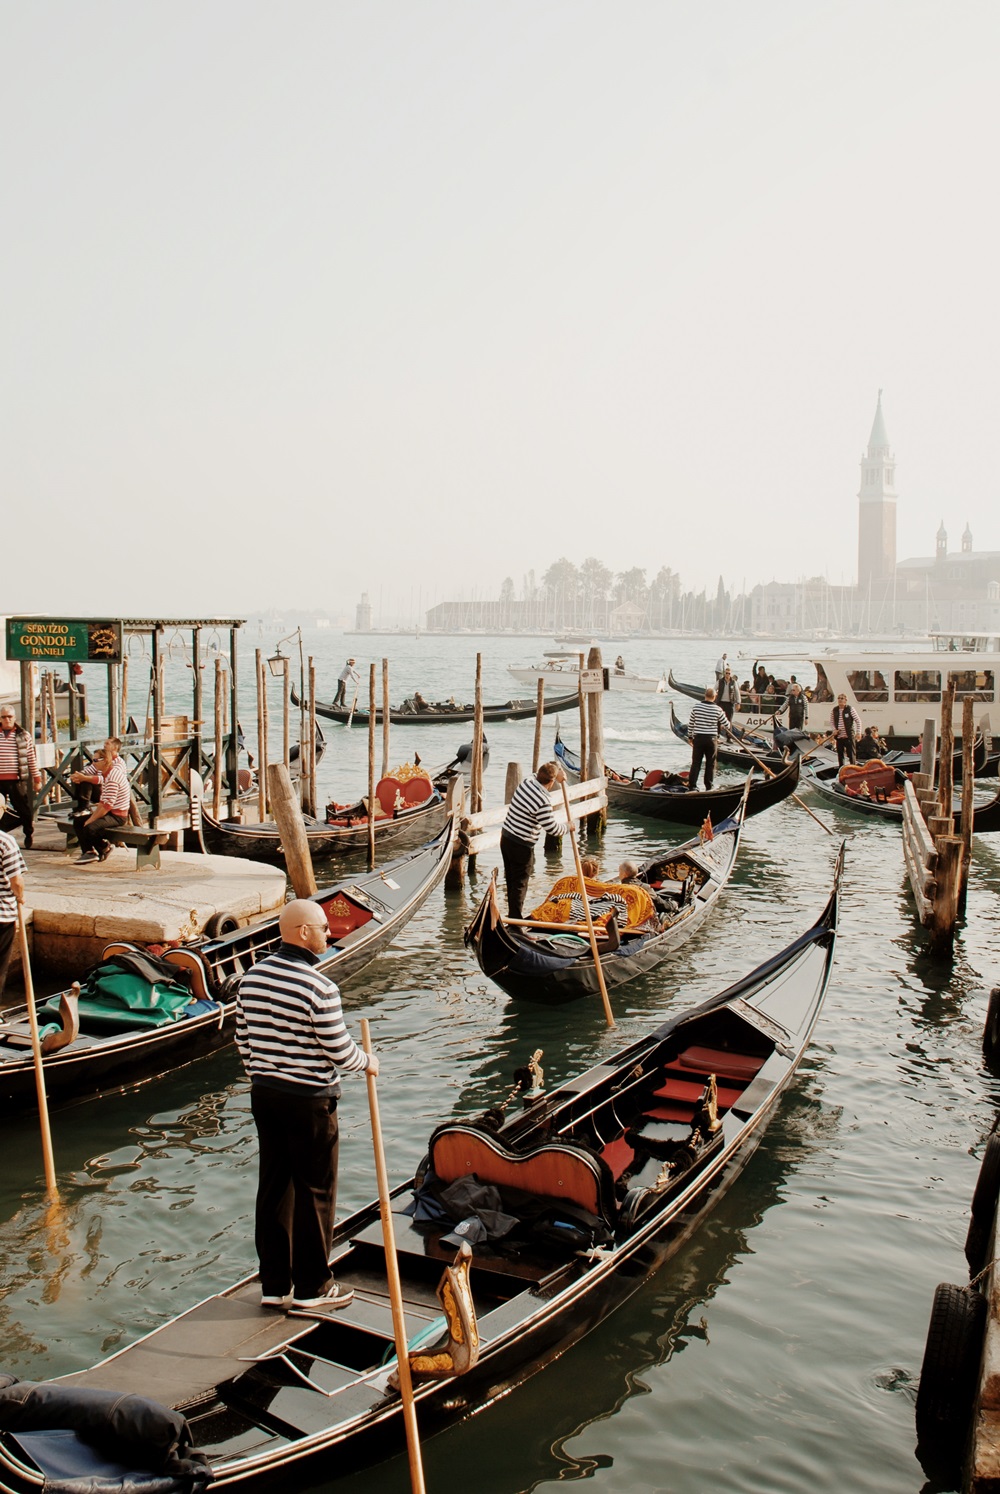 One day in Venice - A Photo Love Story